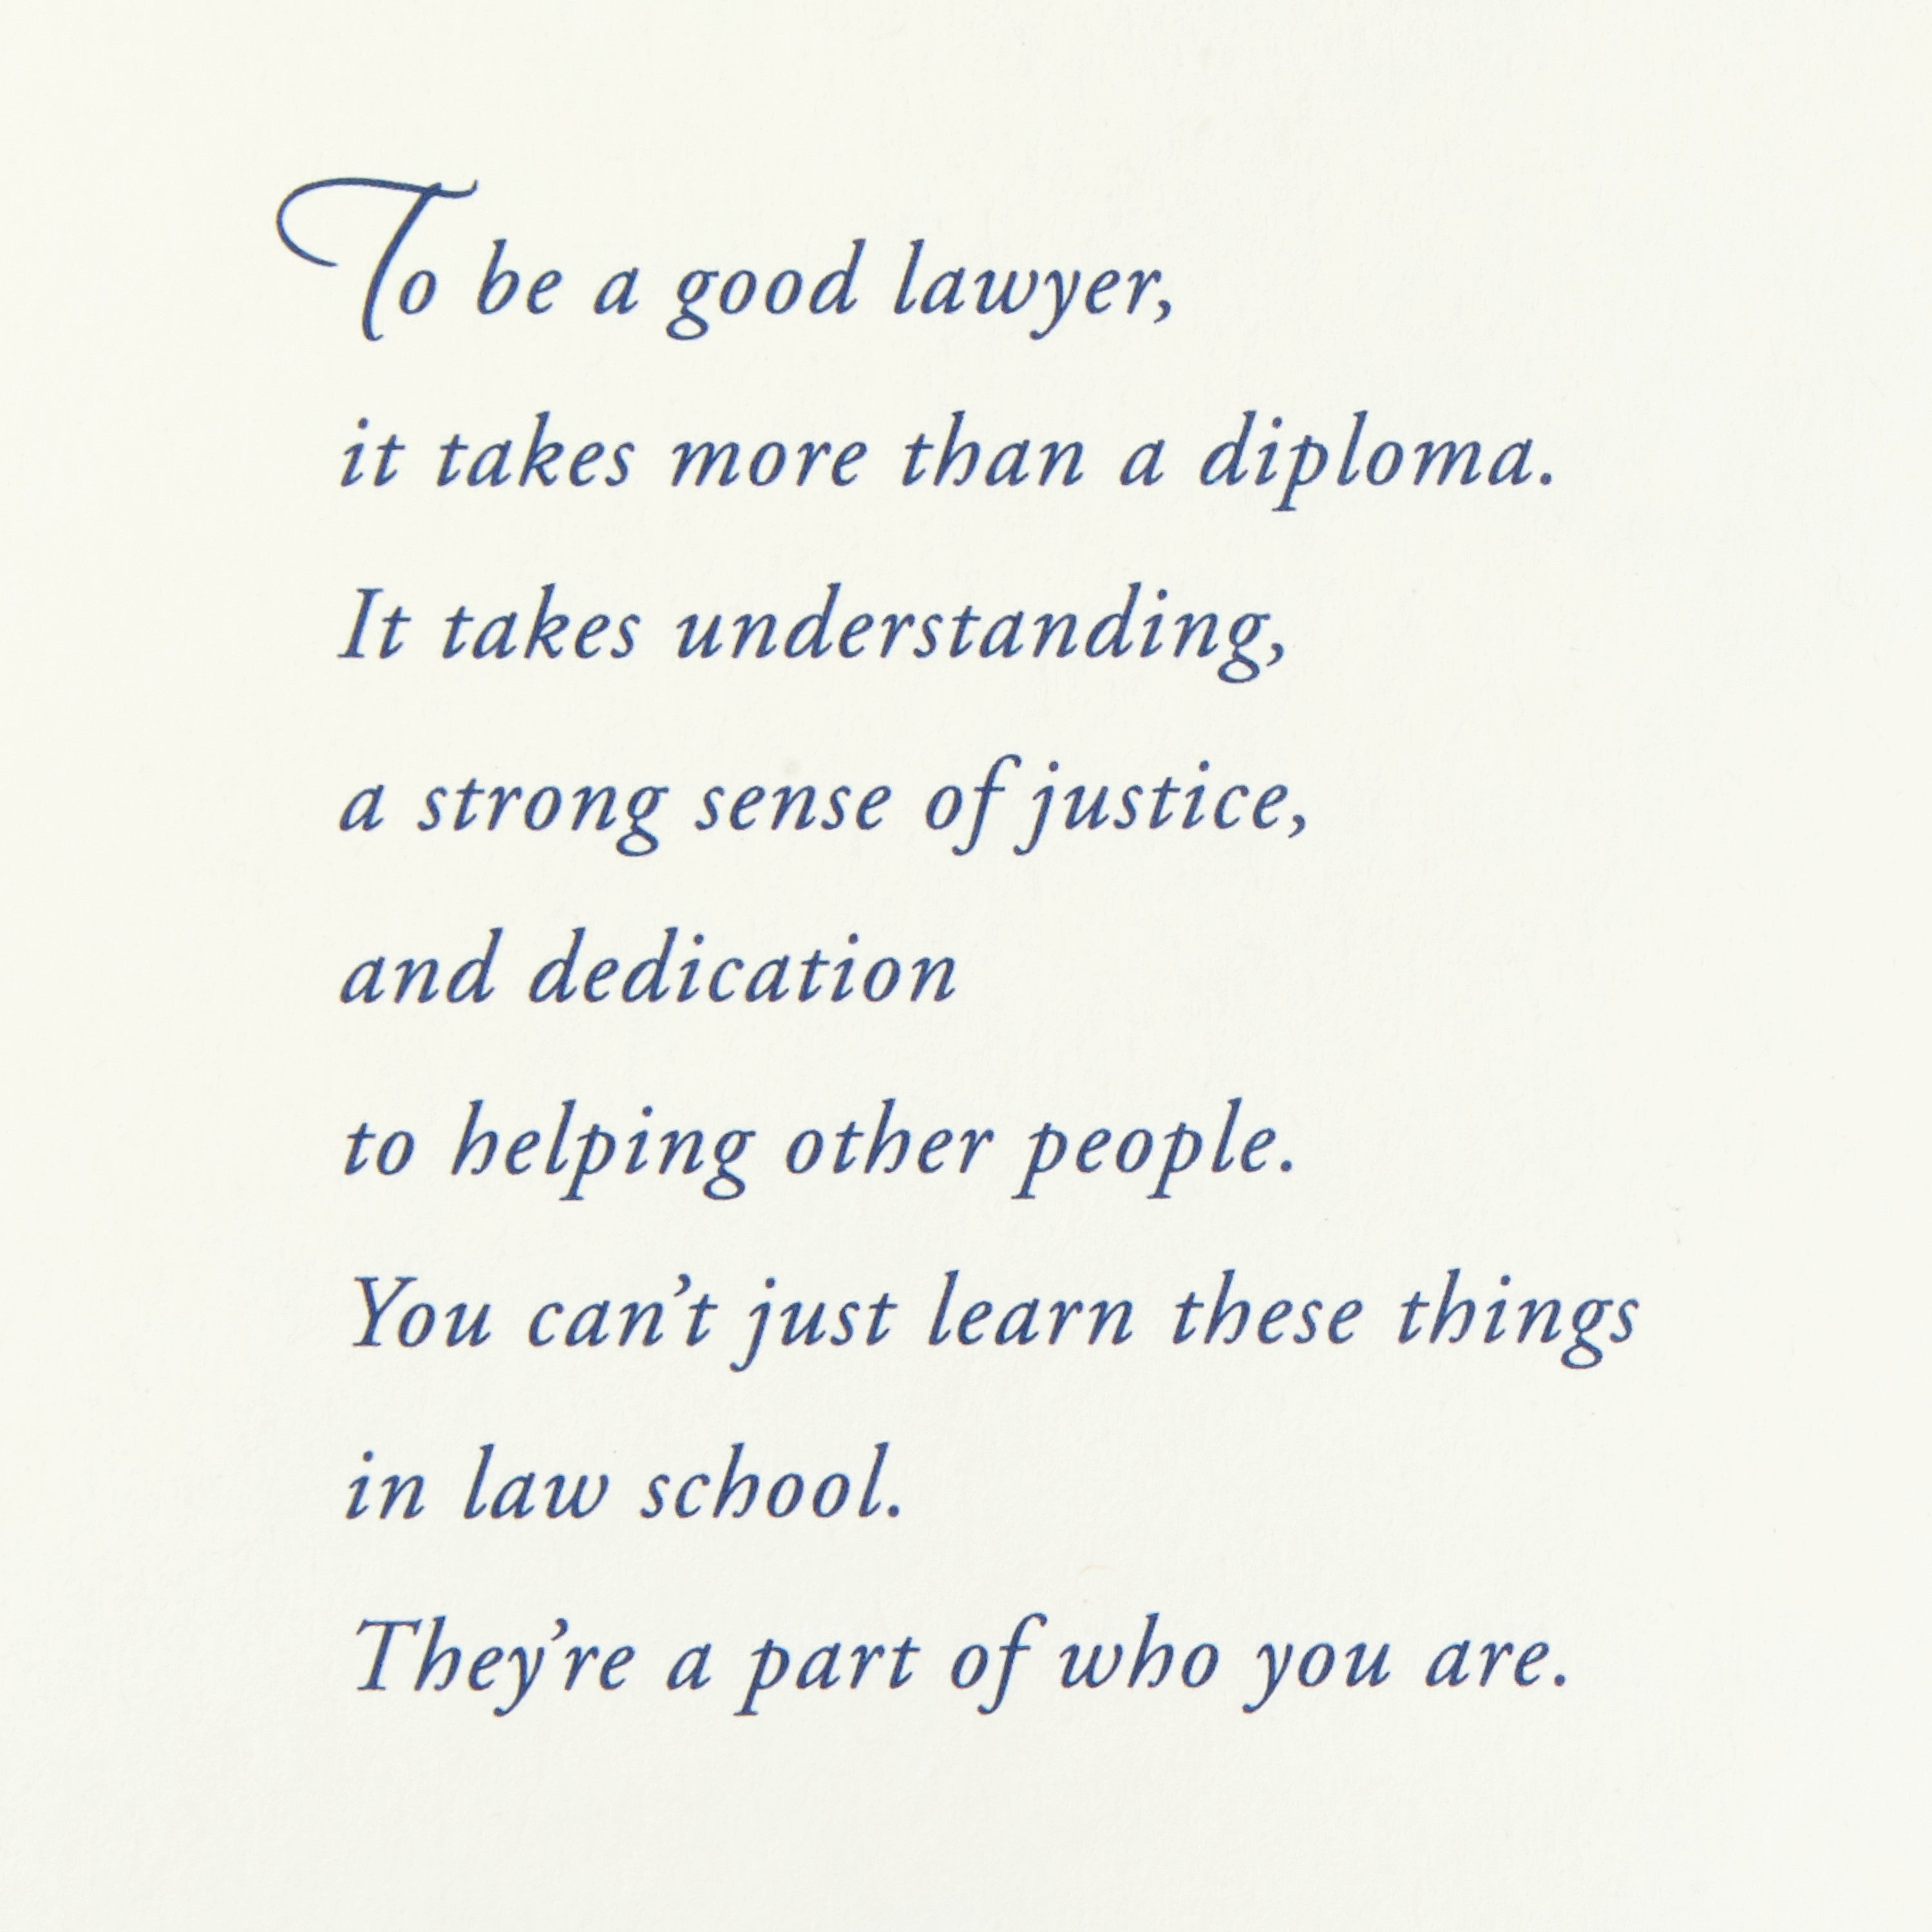 Law School Graduation Card (To Be a Good Lawyer)